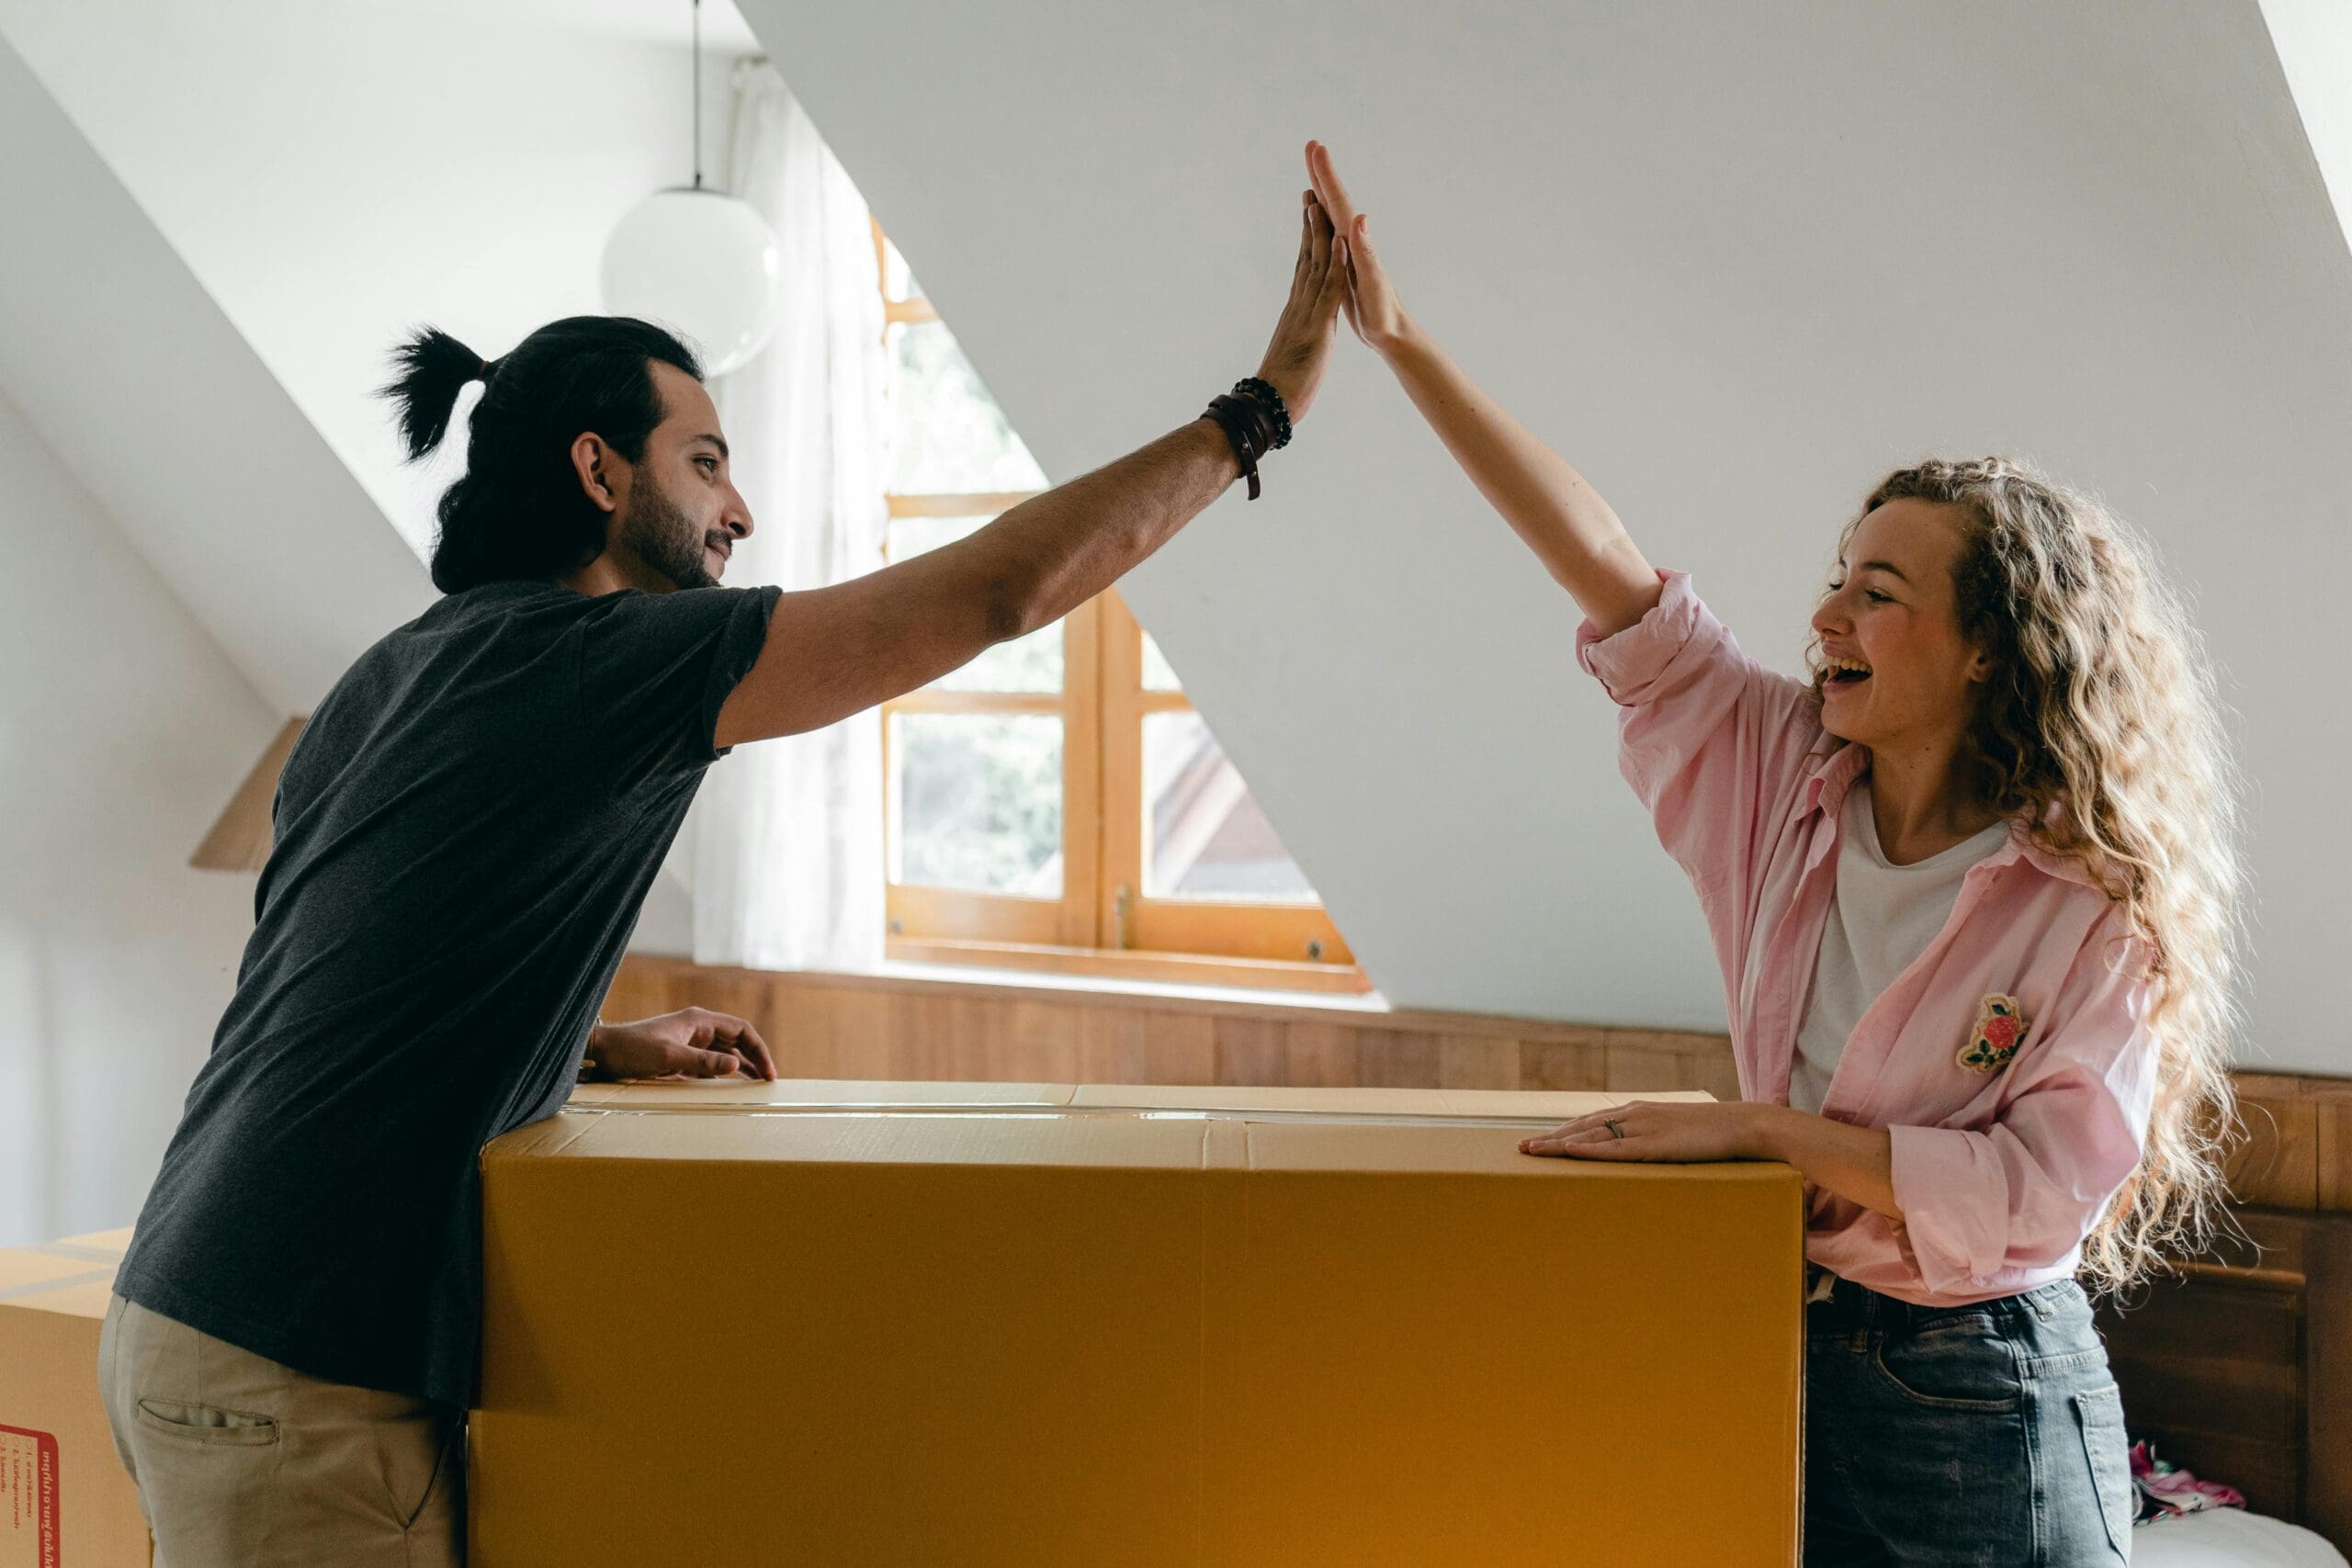 A man and a woman share a high-five over a large cardboard box in a bright room with a slanted ceiling and a window showcasing the beautiful exterior renovations of their Madison, WI home. The man has a bun hairstyle and wears a dark shirt, while the woman has curly hair and wears a pink shirt.